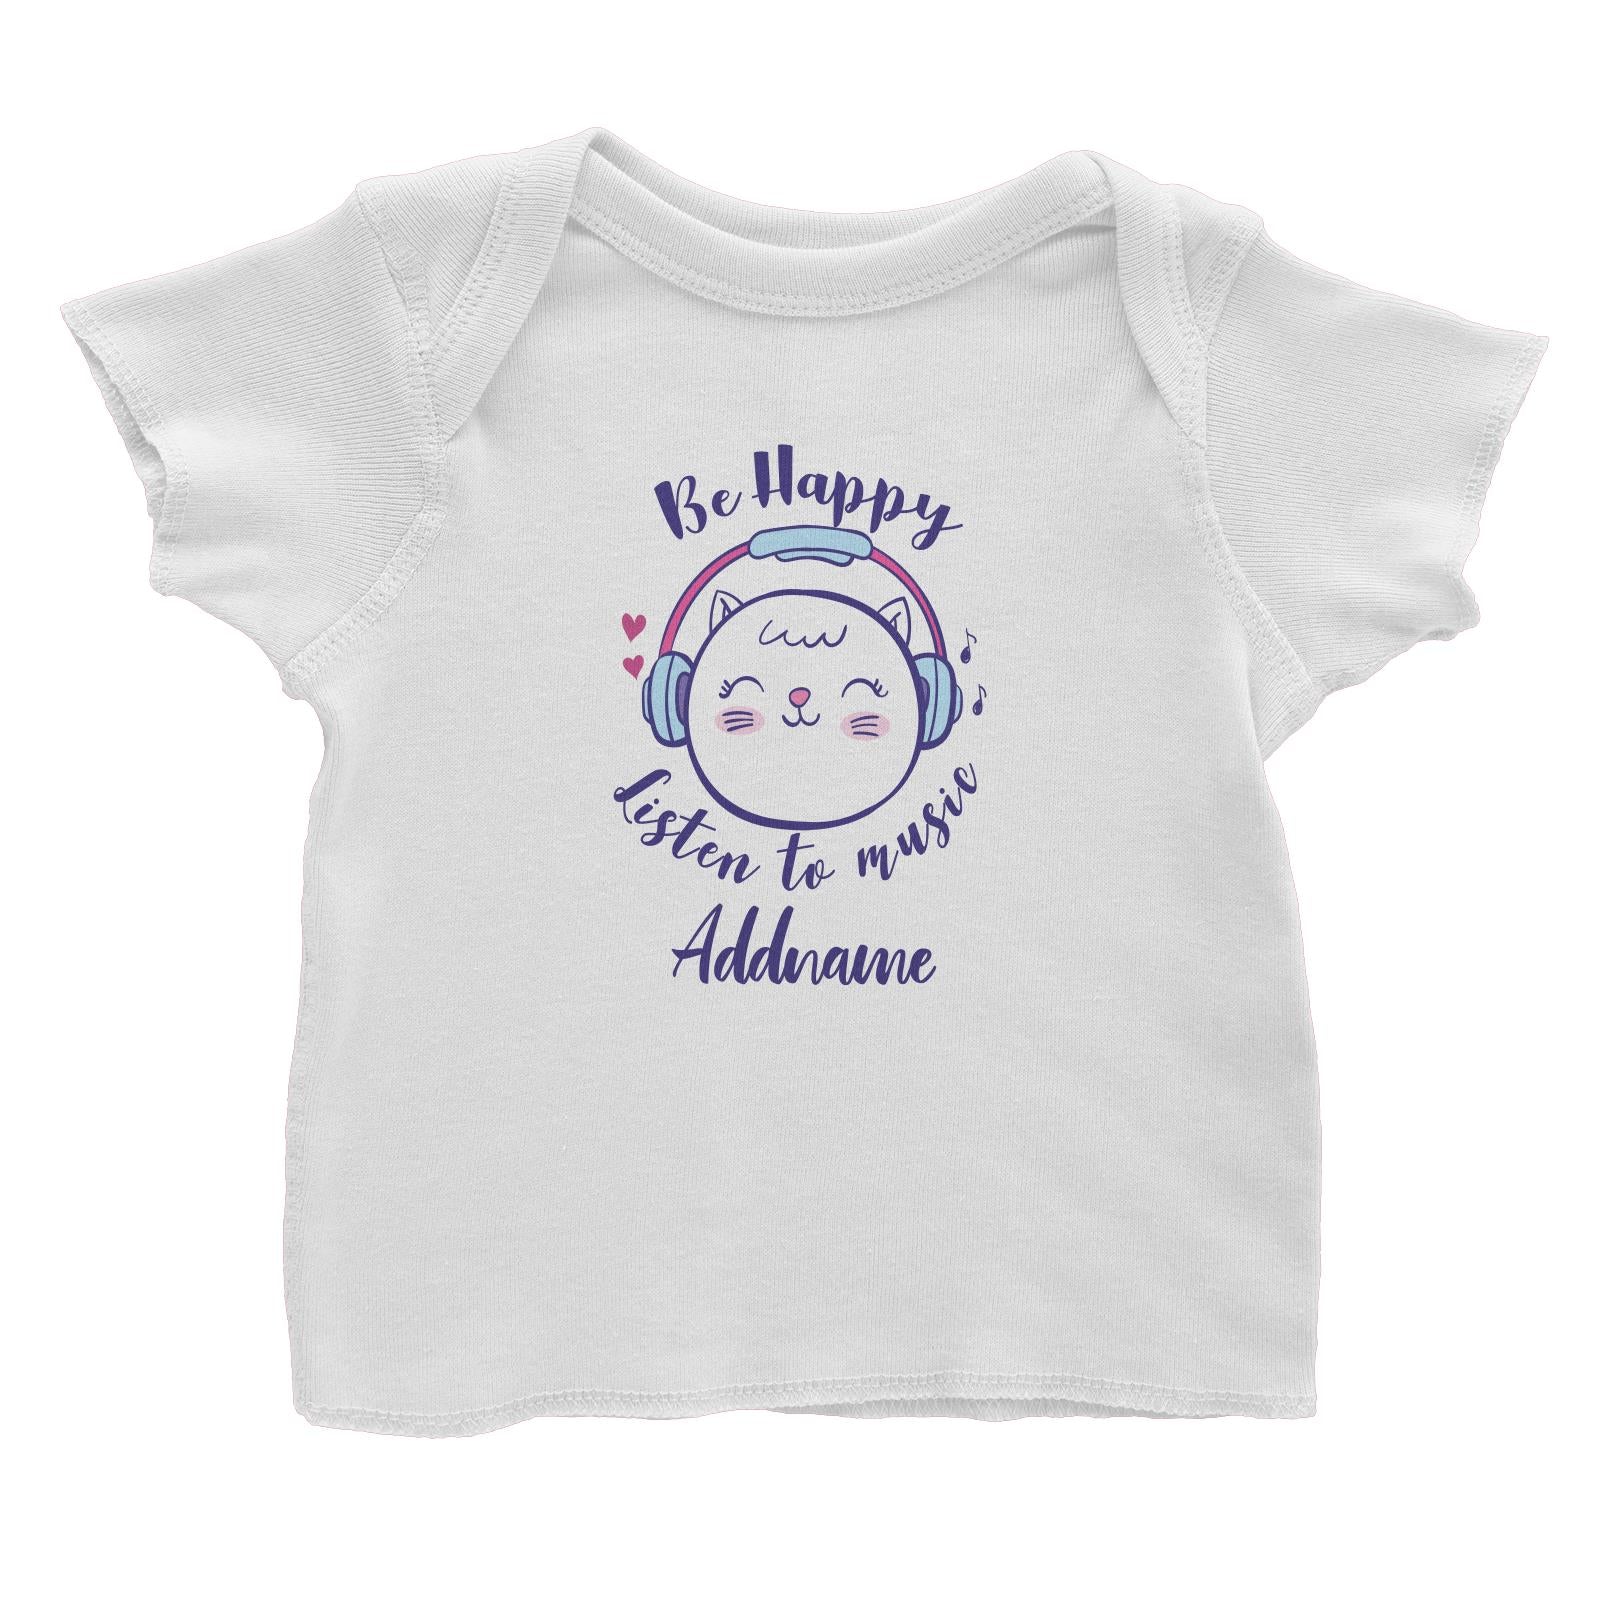 Cool Cute Animals Cats Be Happy Listen To Music Addname Baby T-Shirt